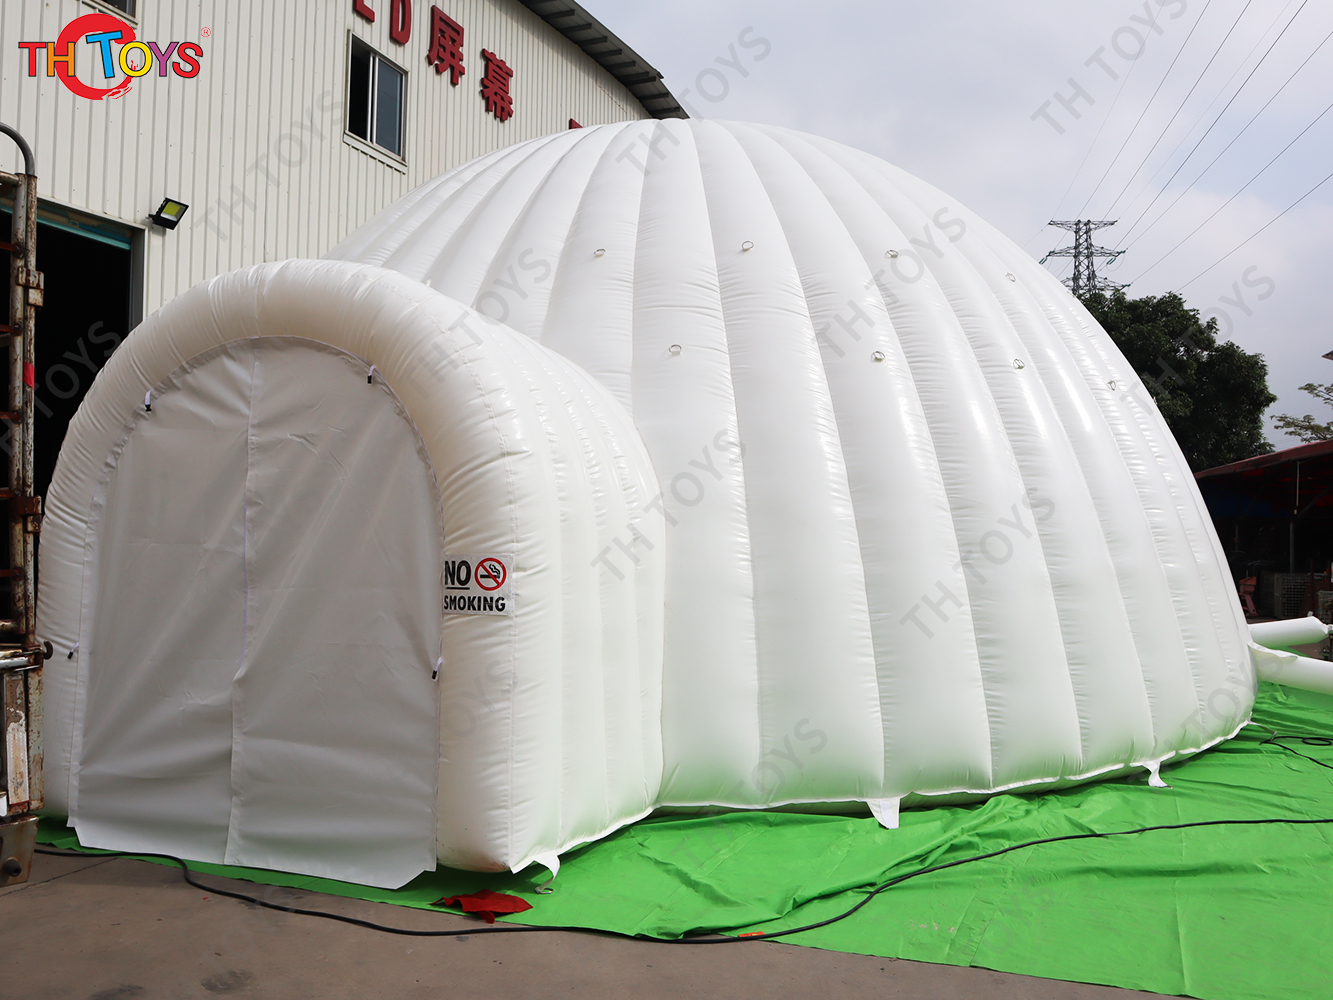 Free Shipping 5m Dia Commercial Inflatable PVC Dome Tent Curved Lawn Tents for Sale